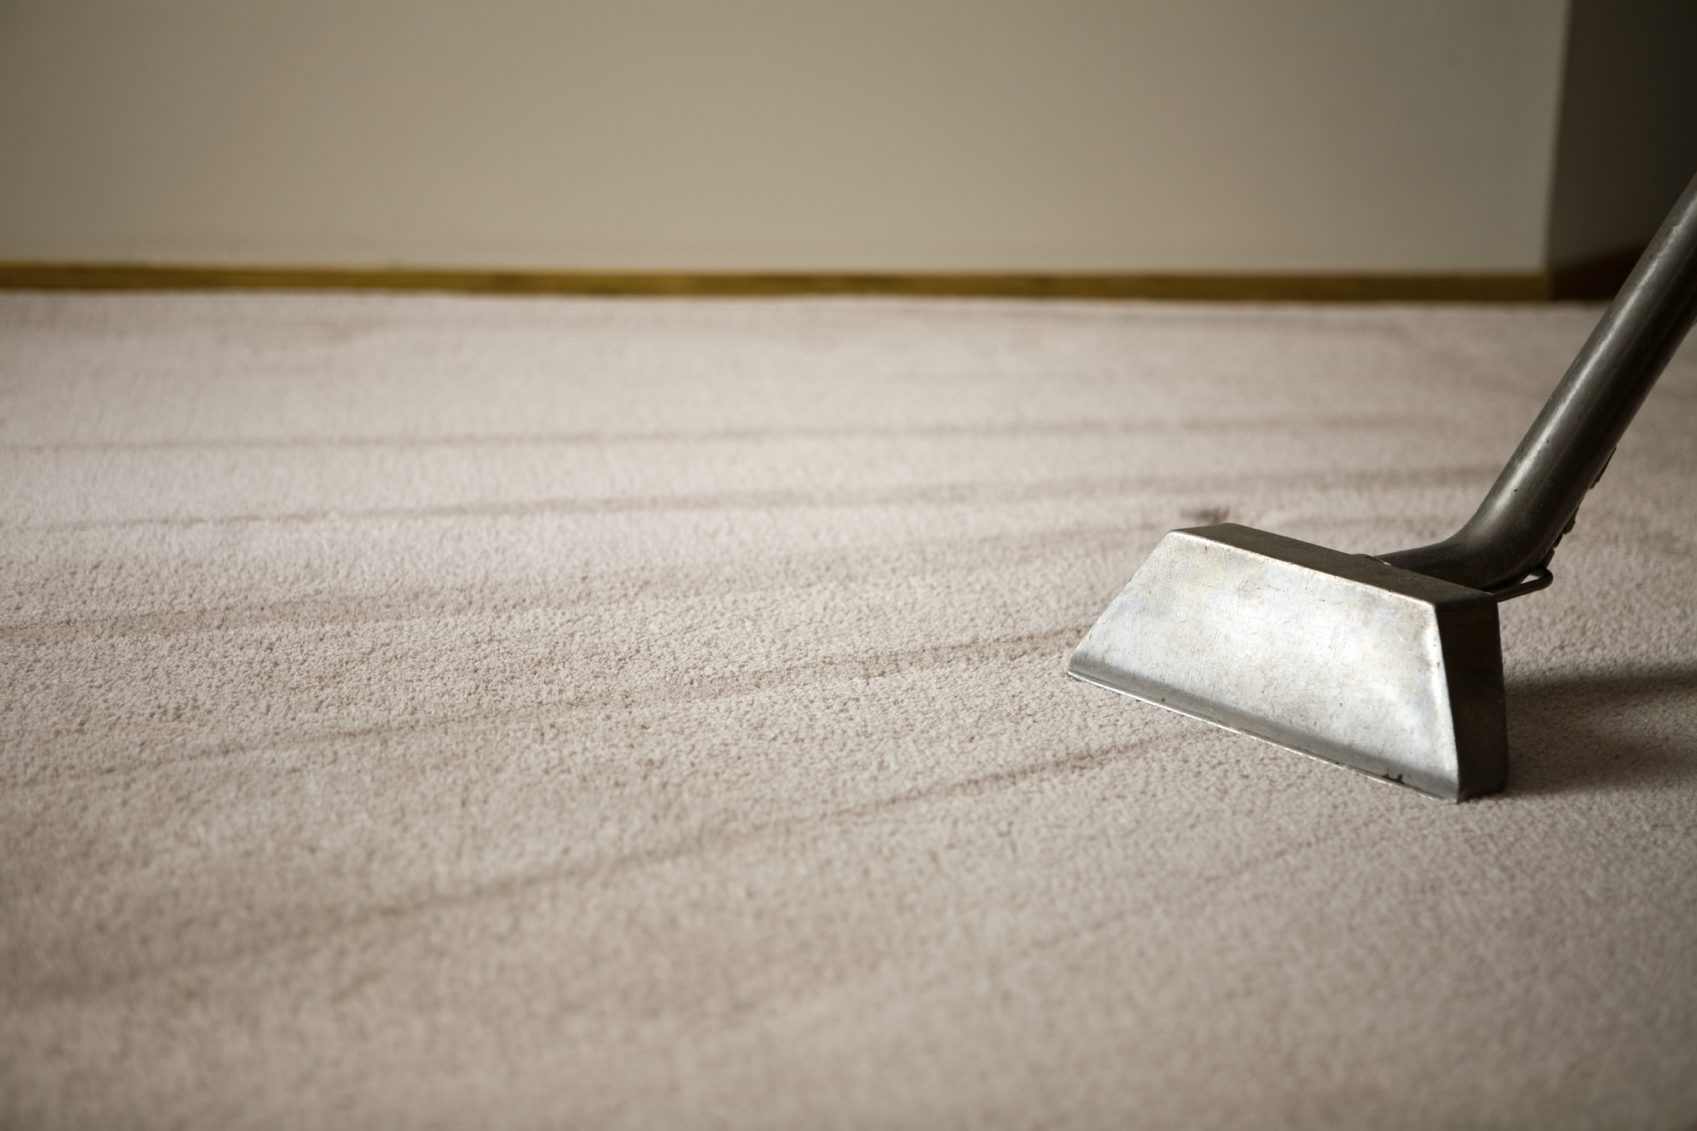 Professional Carpet Cleaning Service Middletown